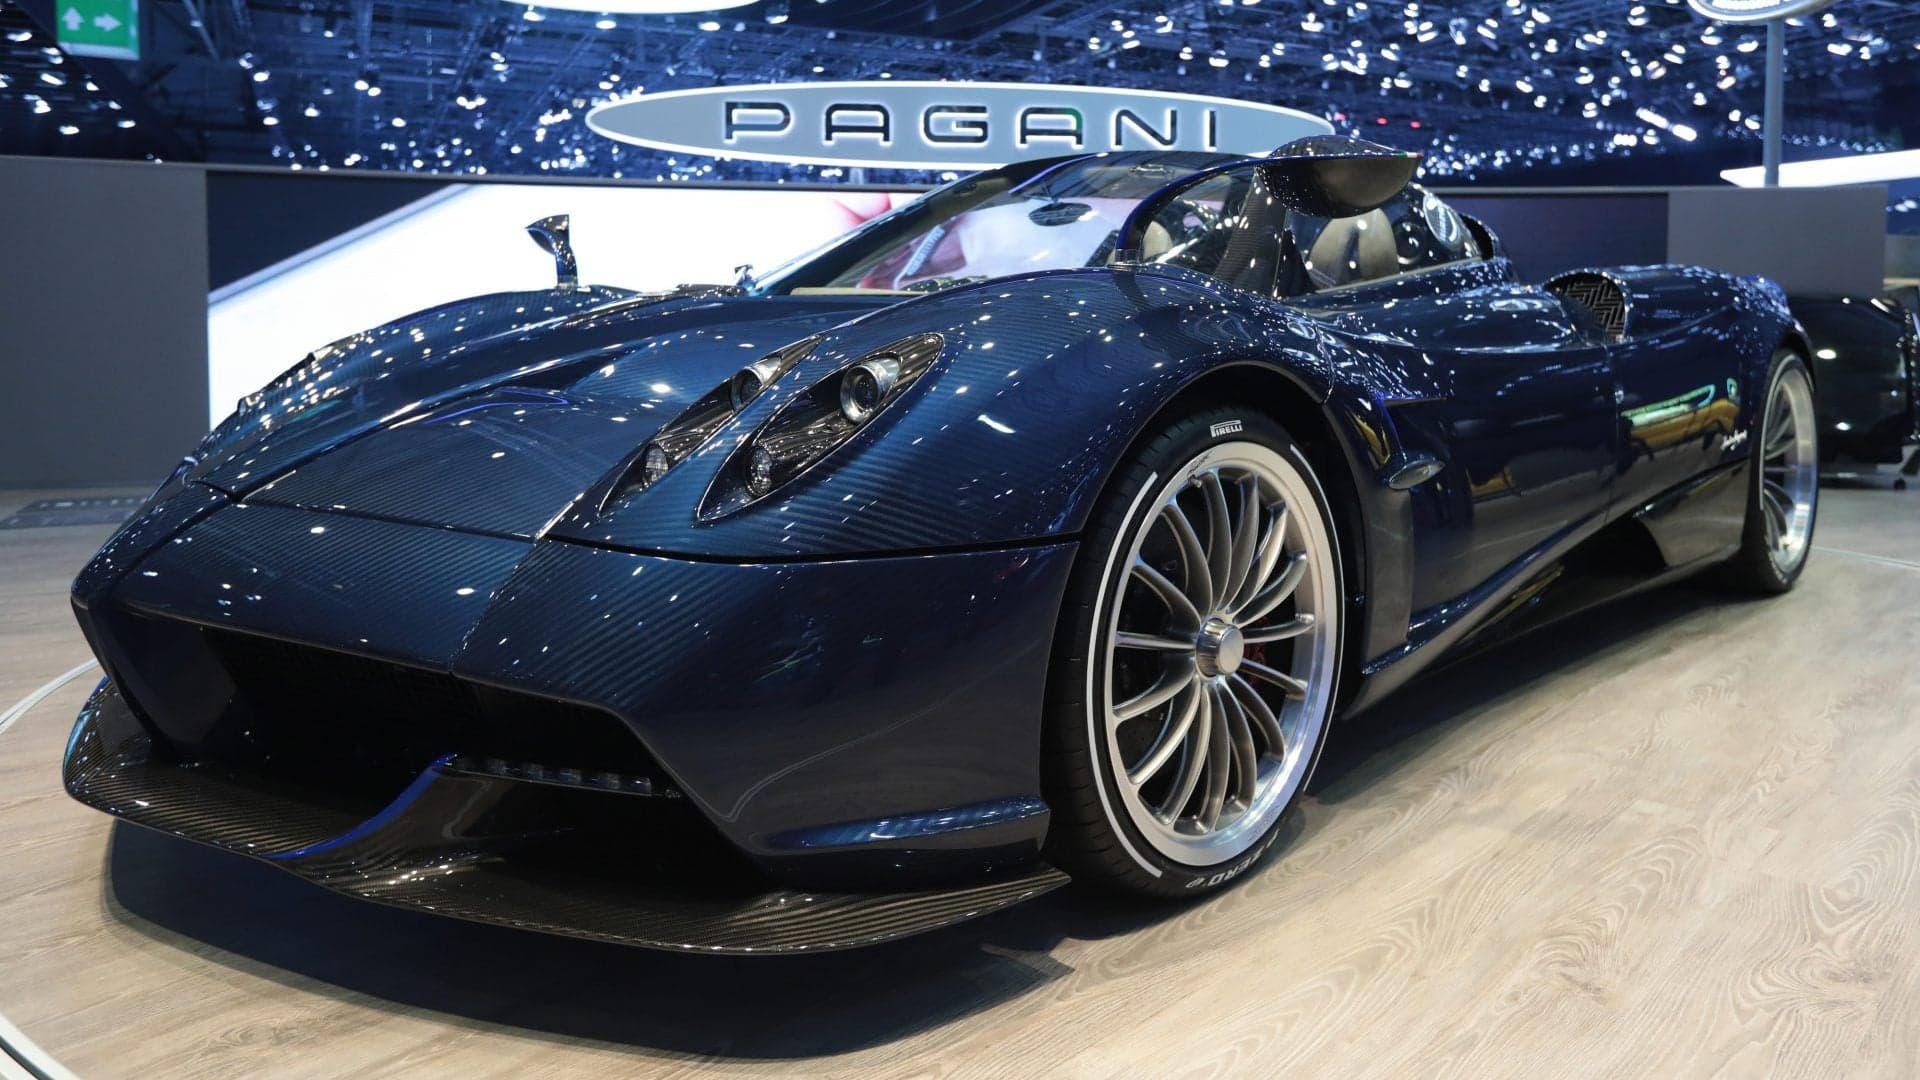 Watch Specialty Automaker Horacio Pagani Build a Huayra Roadster